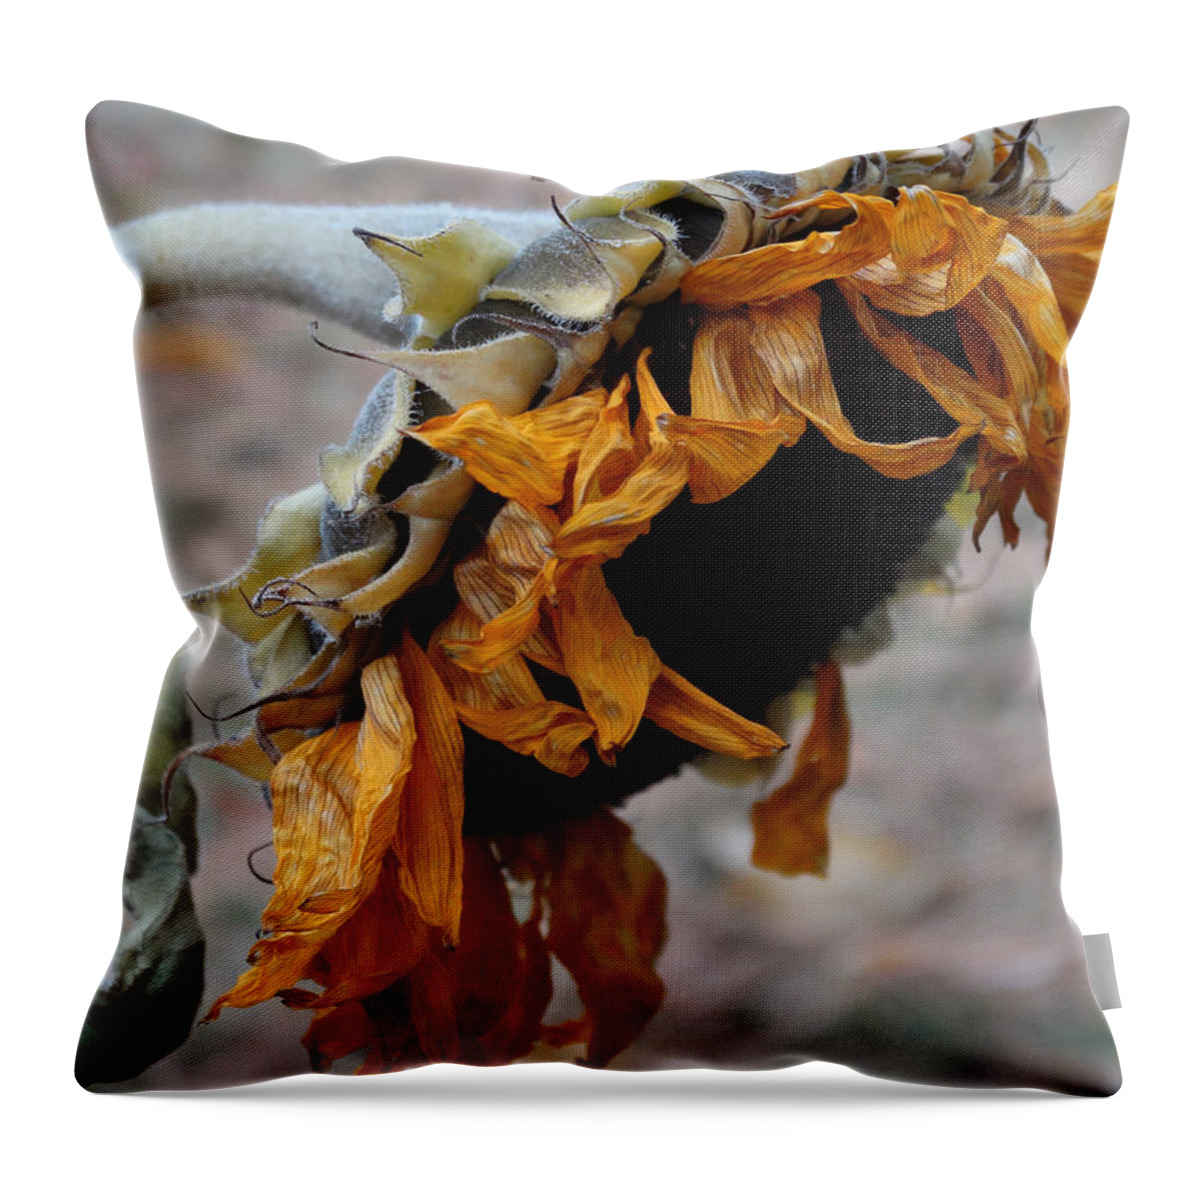 Sunflower Throw Pillow featuring the photograph Fading Sunflower by David T Wilkinson